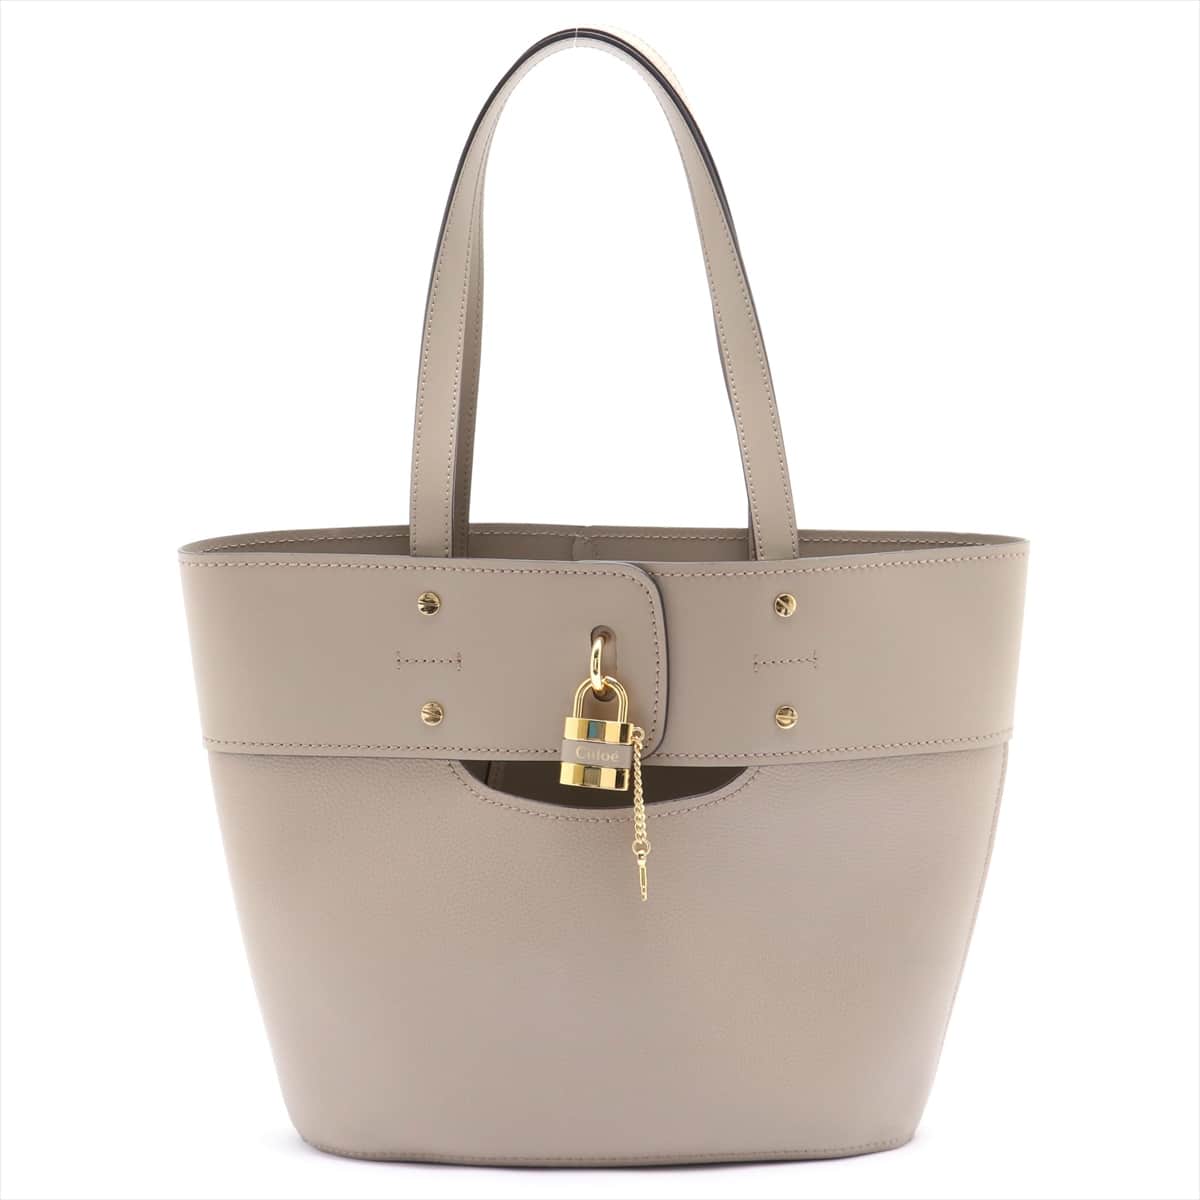 Chloe Abbey Leather Tote bag Beige with pouch